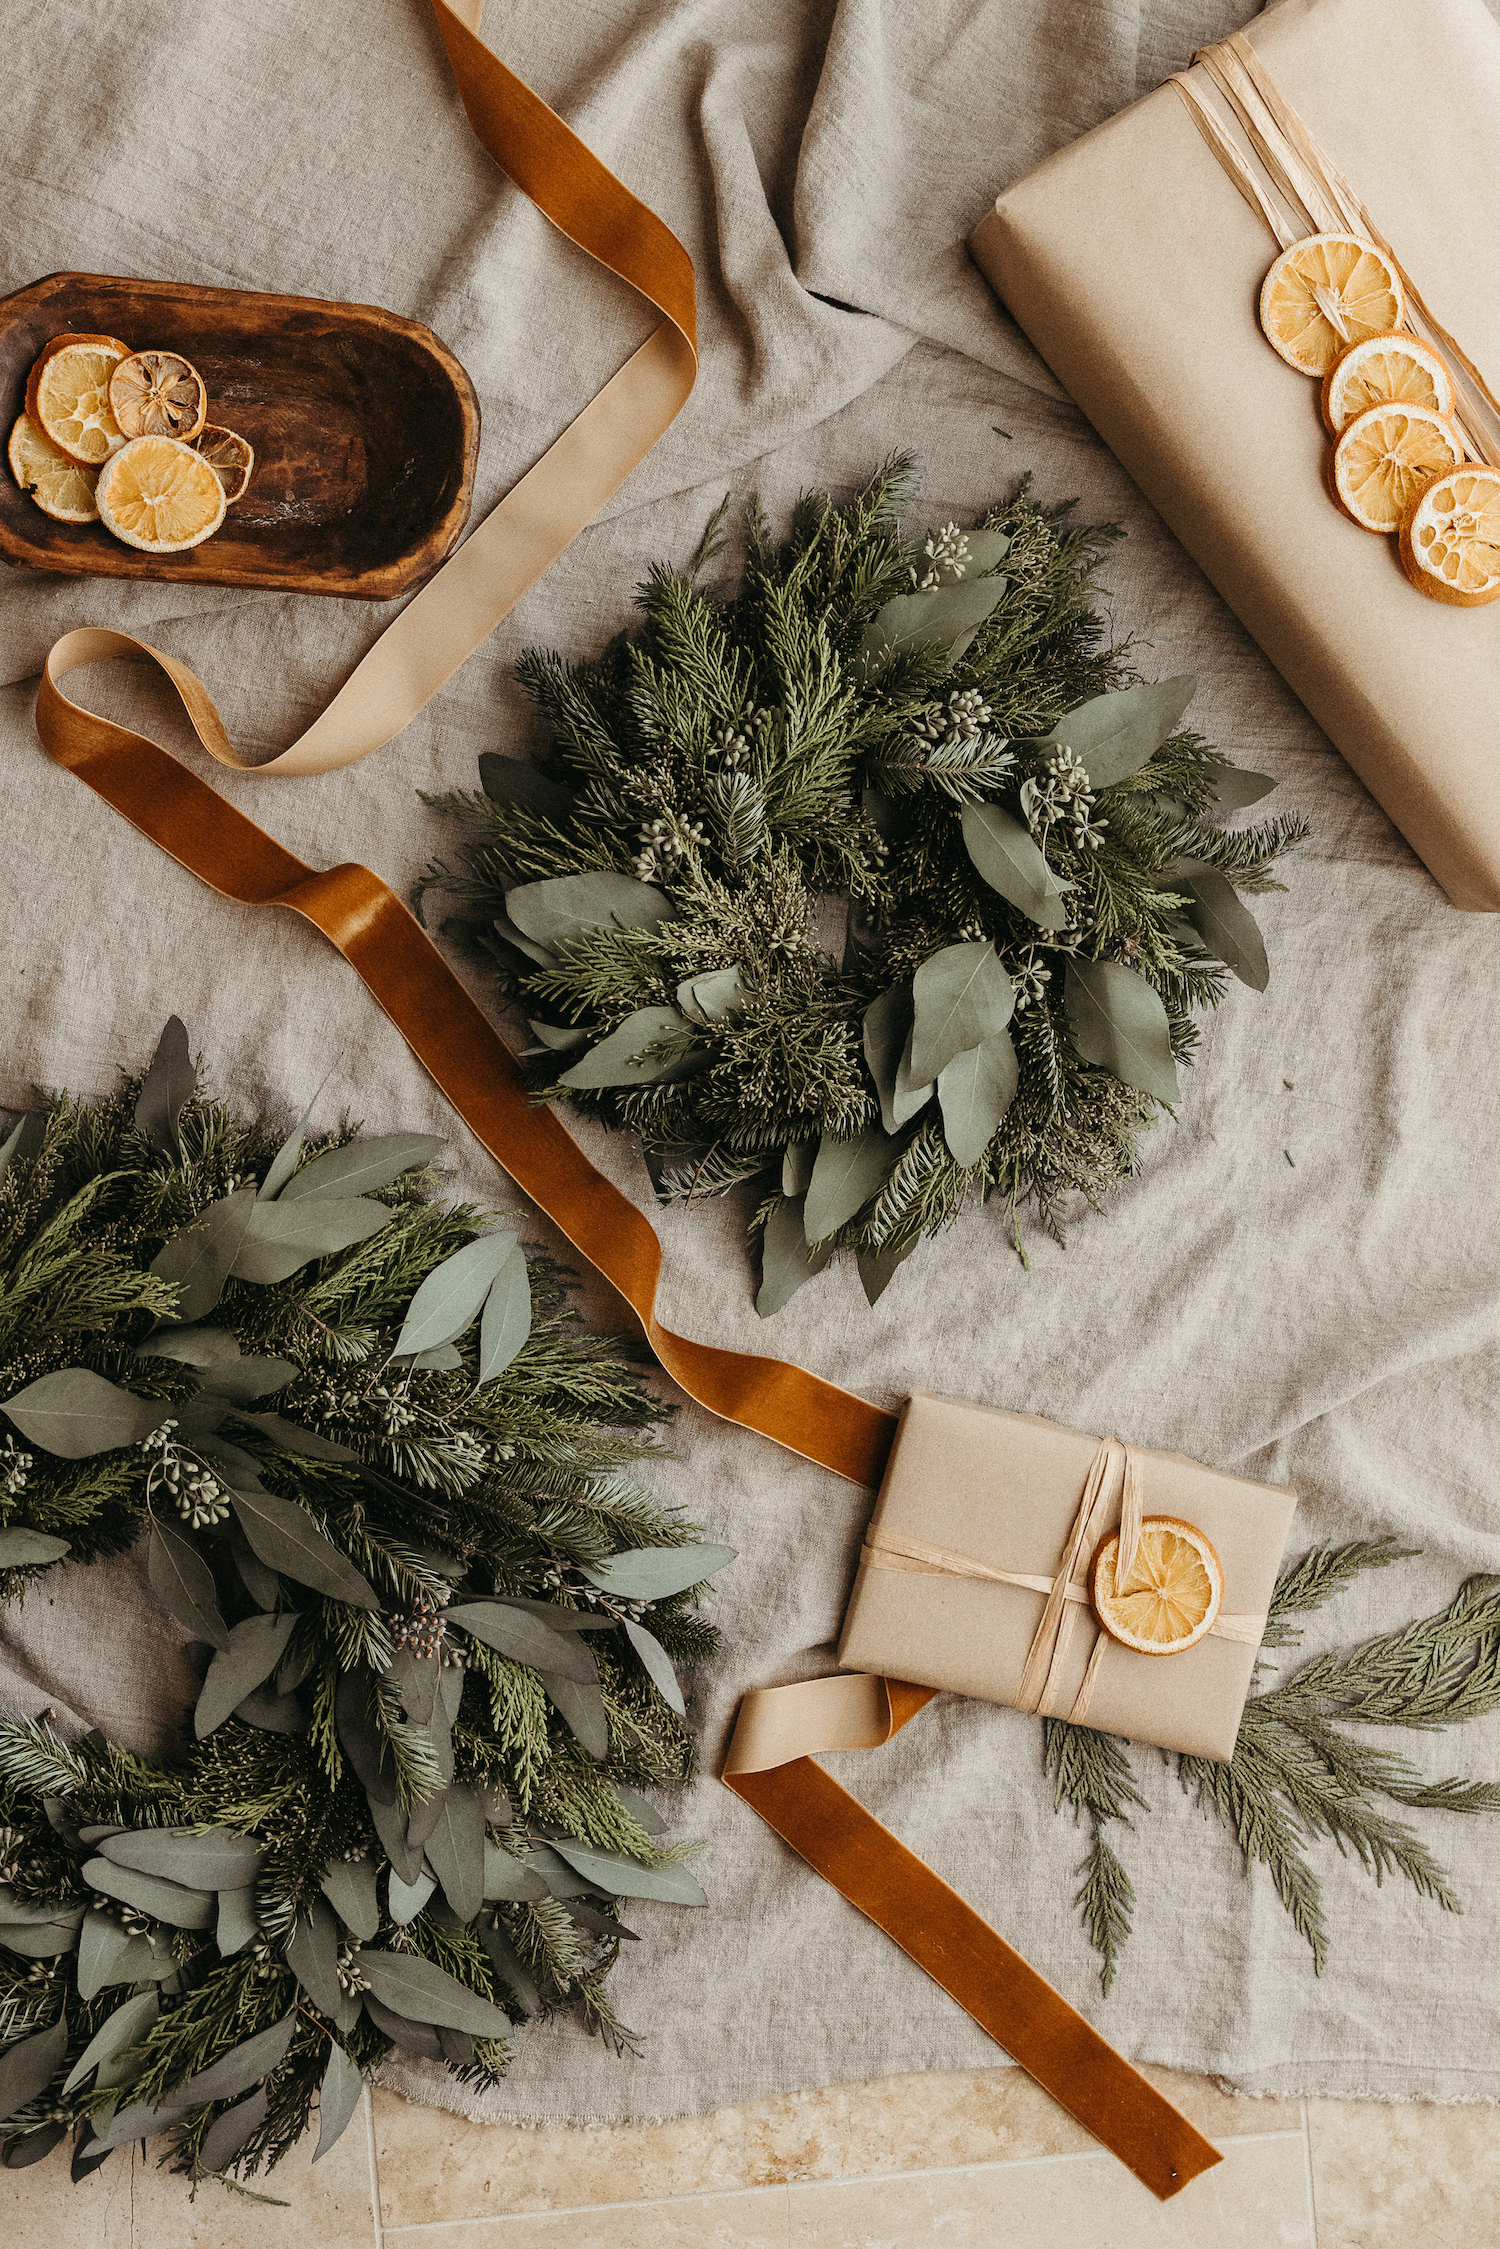 Camille Styles Holiday Decor 2023-Christmas tree with kraft paper presents and dried citrus-rustic gift wrapping and evergreen casa zuma holiday wreath